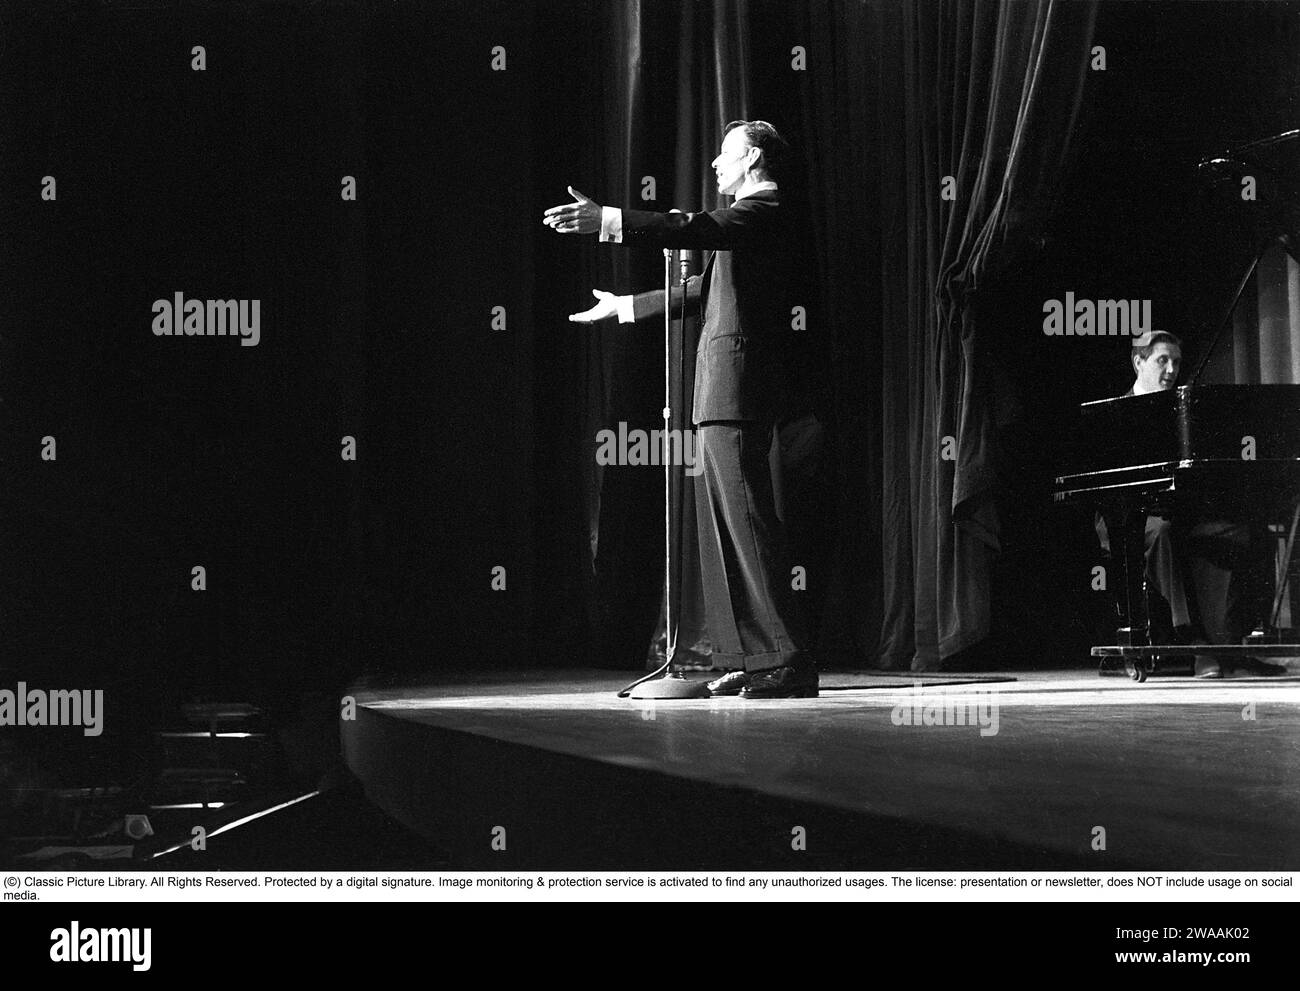 Frank Sinatra. American singer and actor. Born 12 December 1915, died 14 May 1998. Here during a tour in Sweden june 1953 and performing on stage.  Ref Anders Svahn Stock Photo